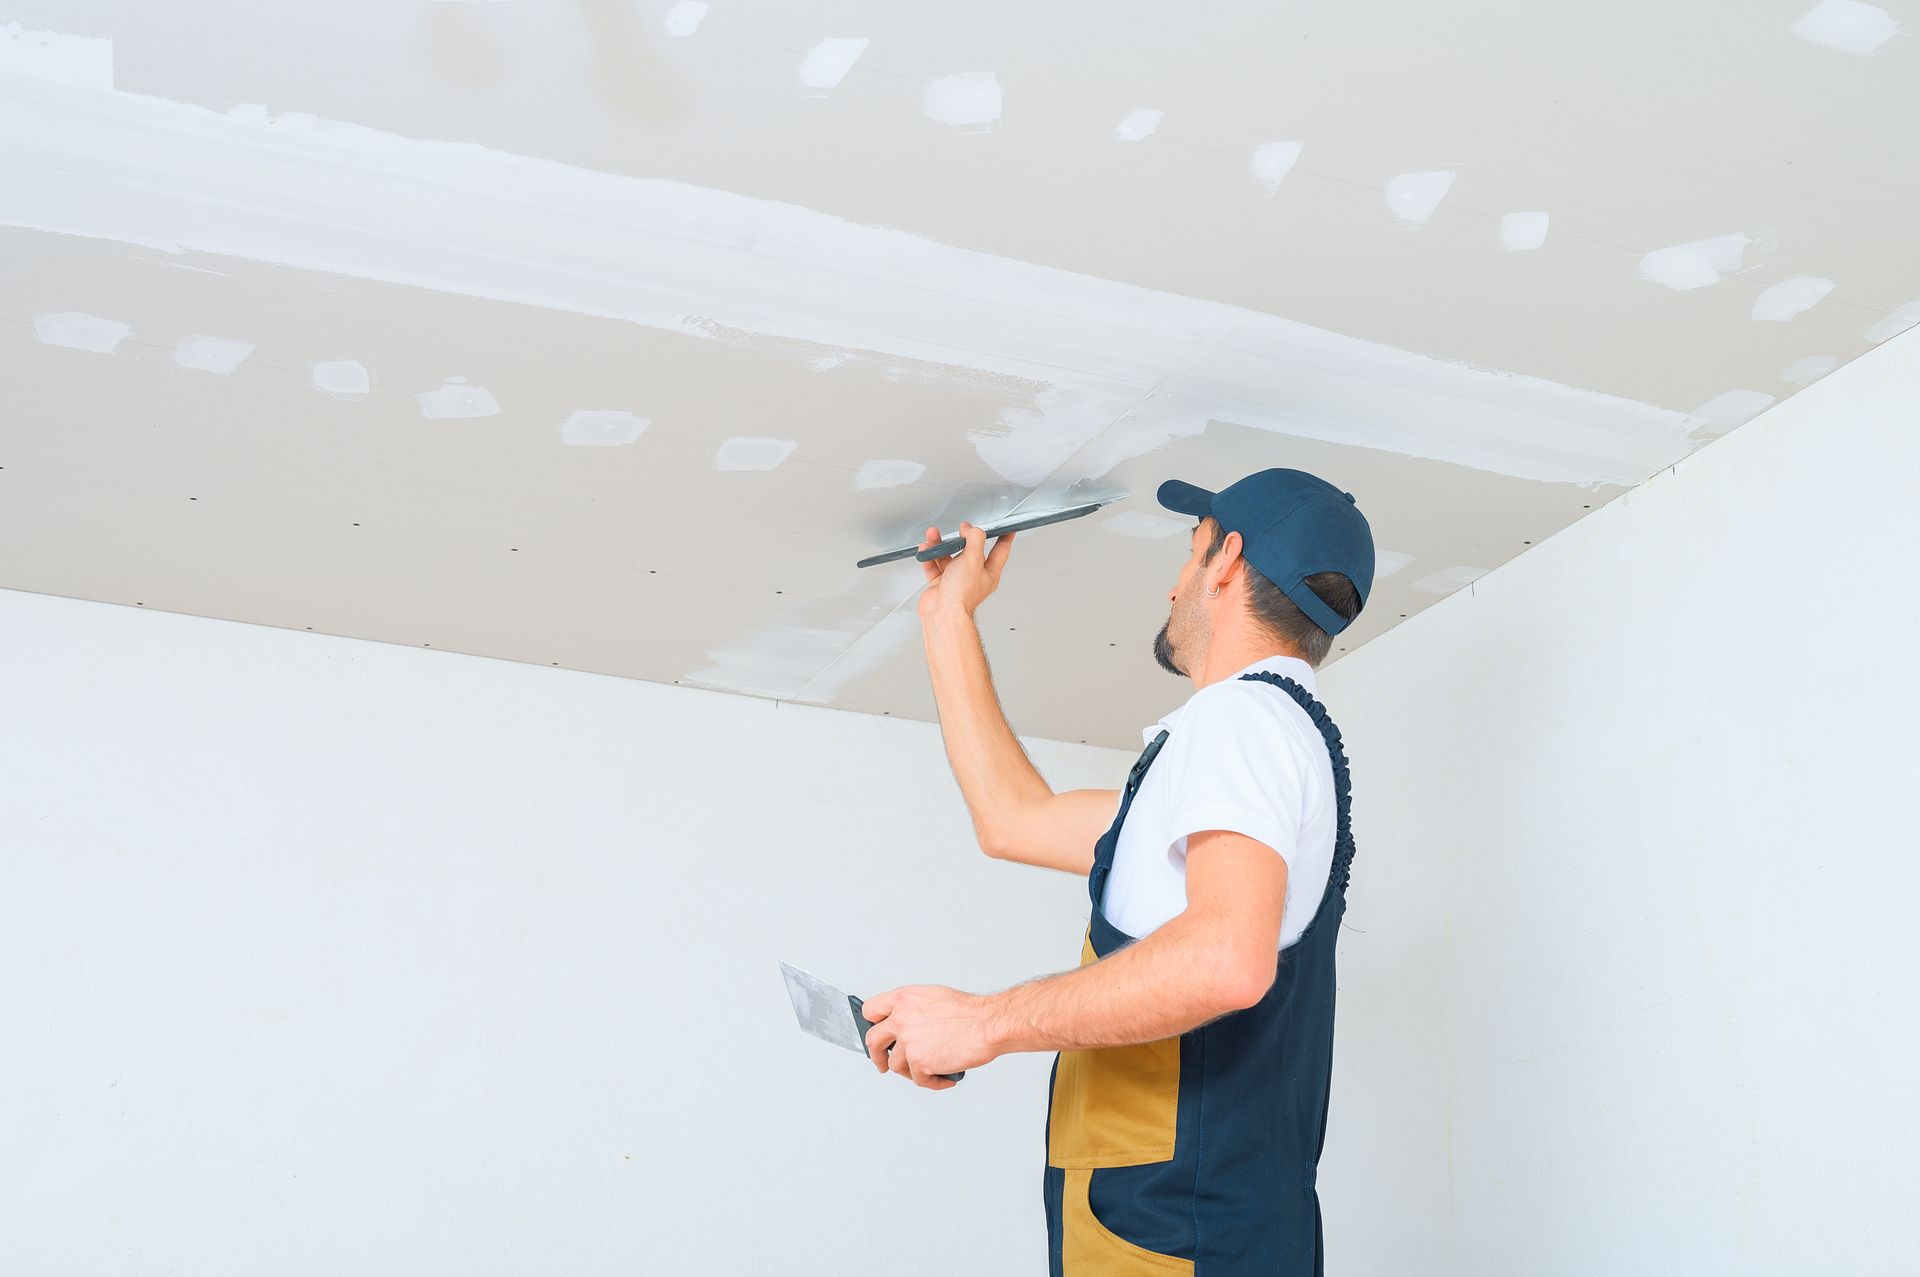 A uniformed worker applies putty to the drywall ceiling.